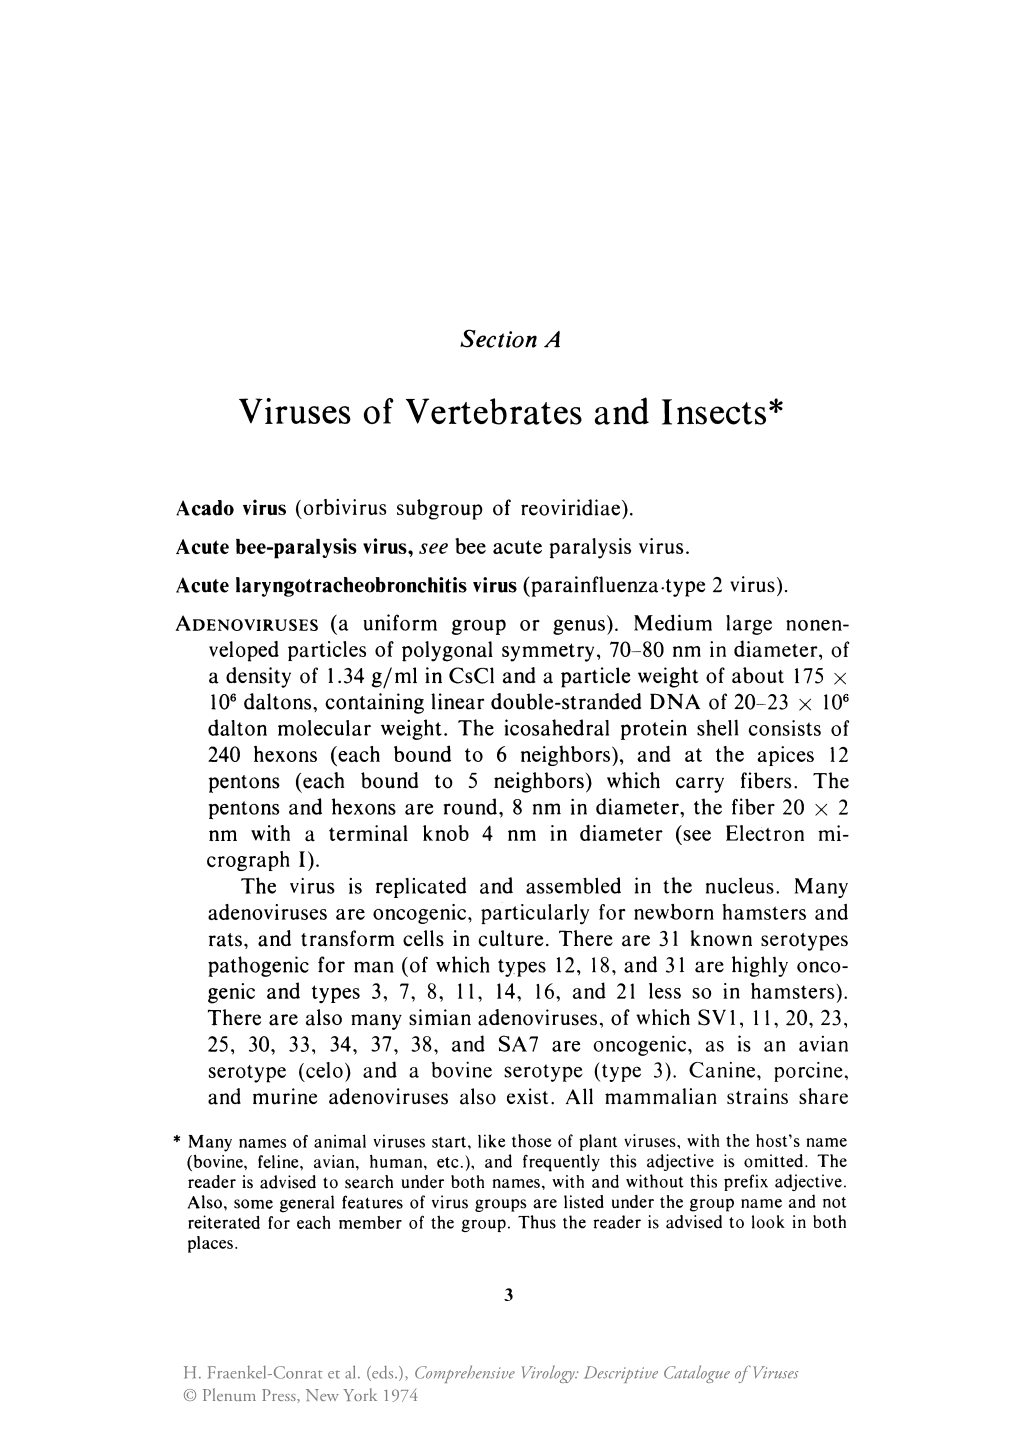 Viruses of Vertebrates and Insects*